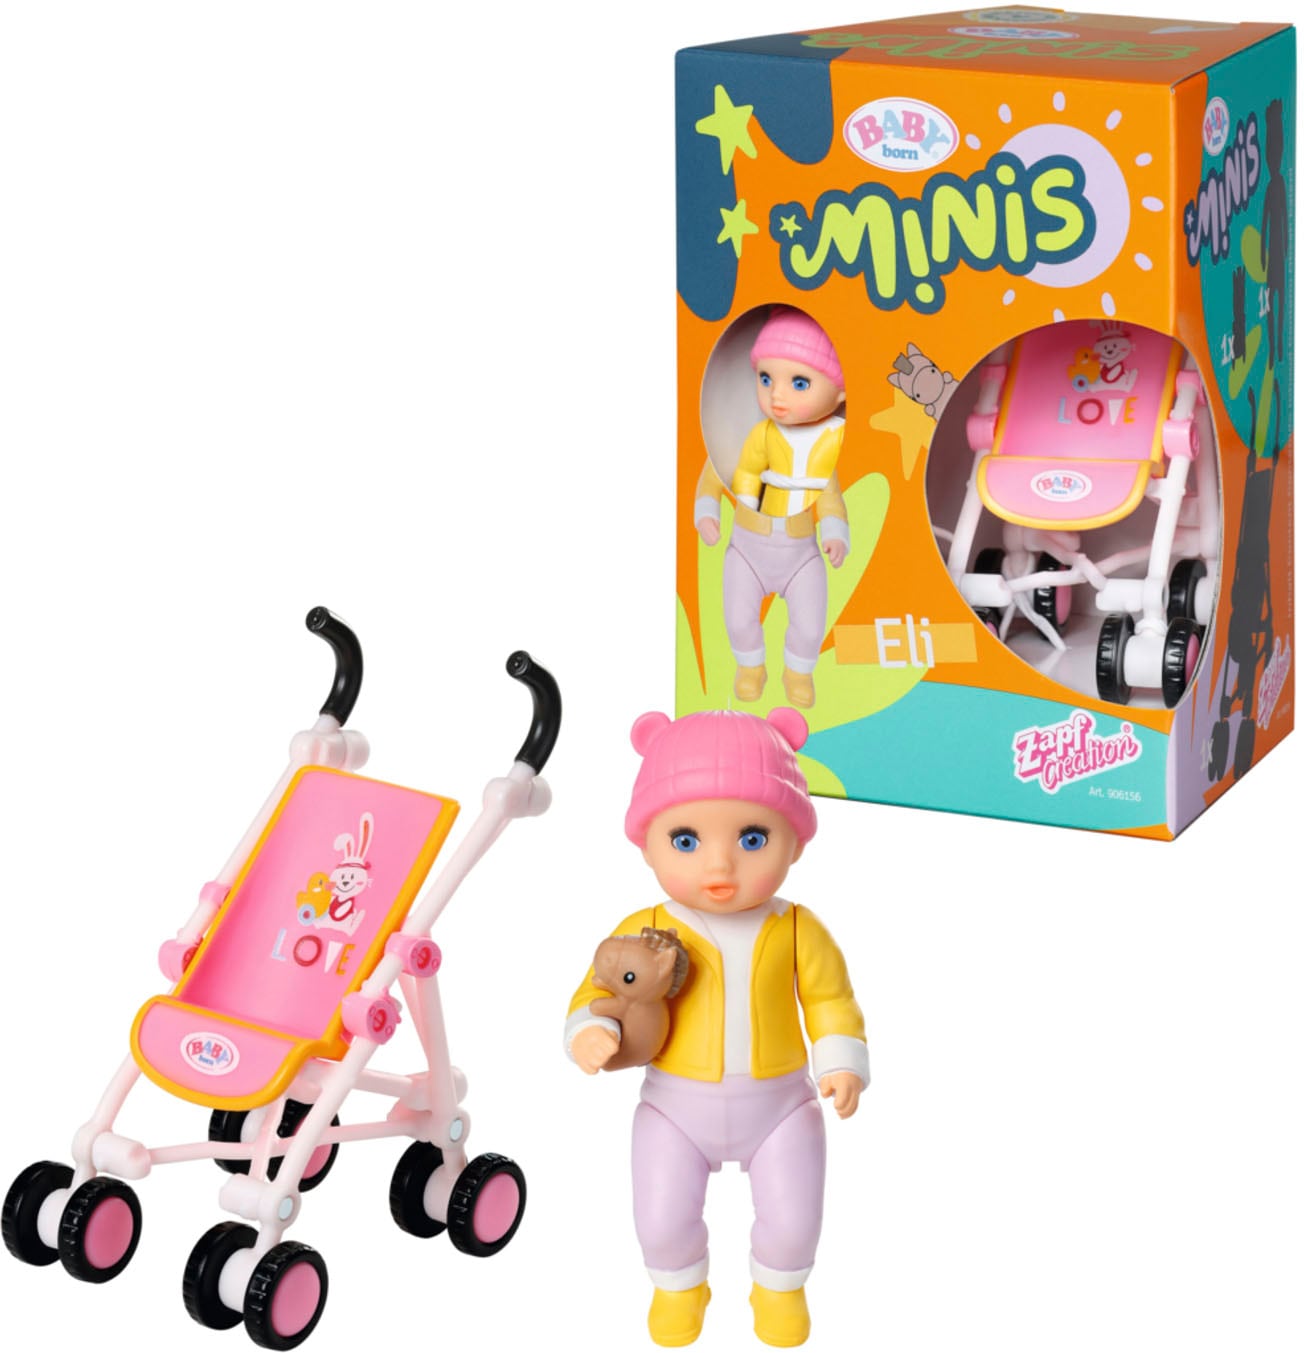 Minipuppe »Baby born® Minis Spielset Buggy«, inklusive Baby born® Mini Puppe